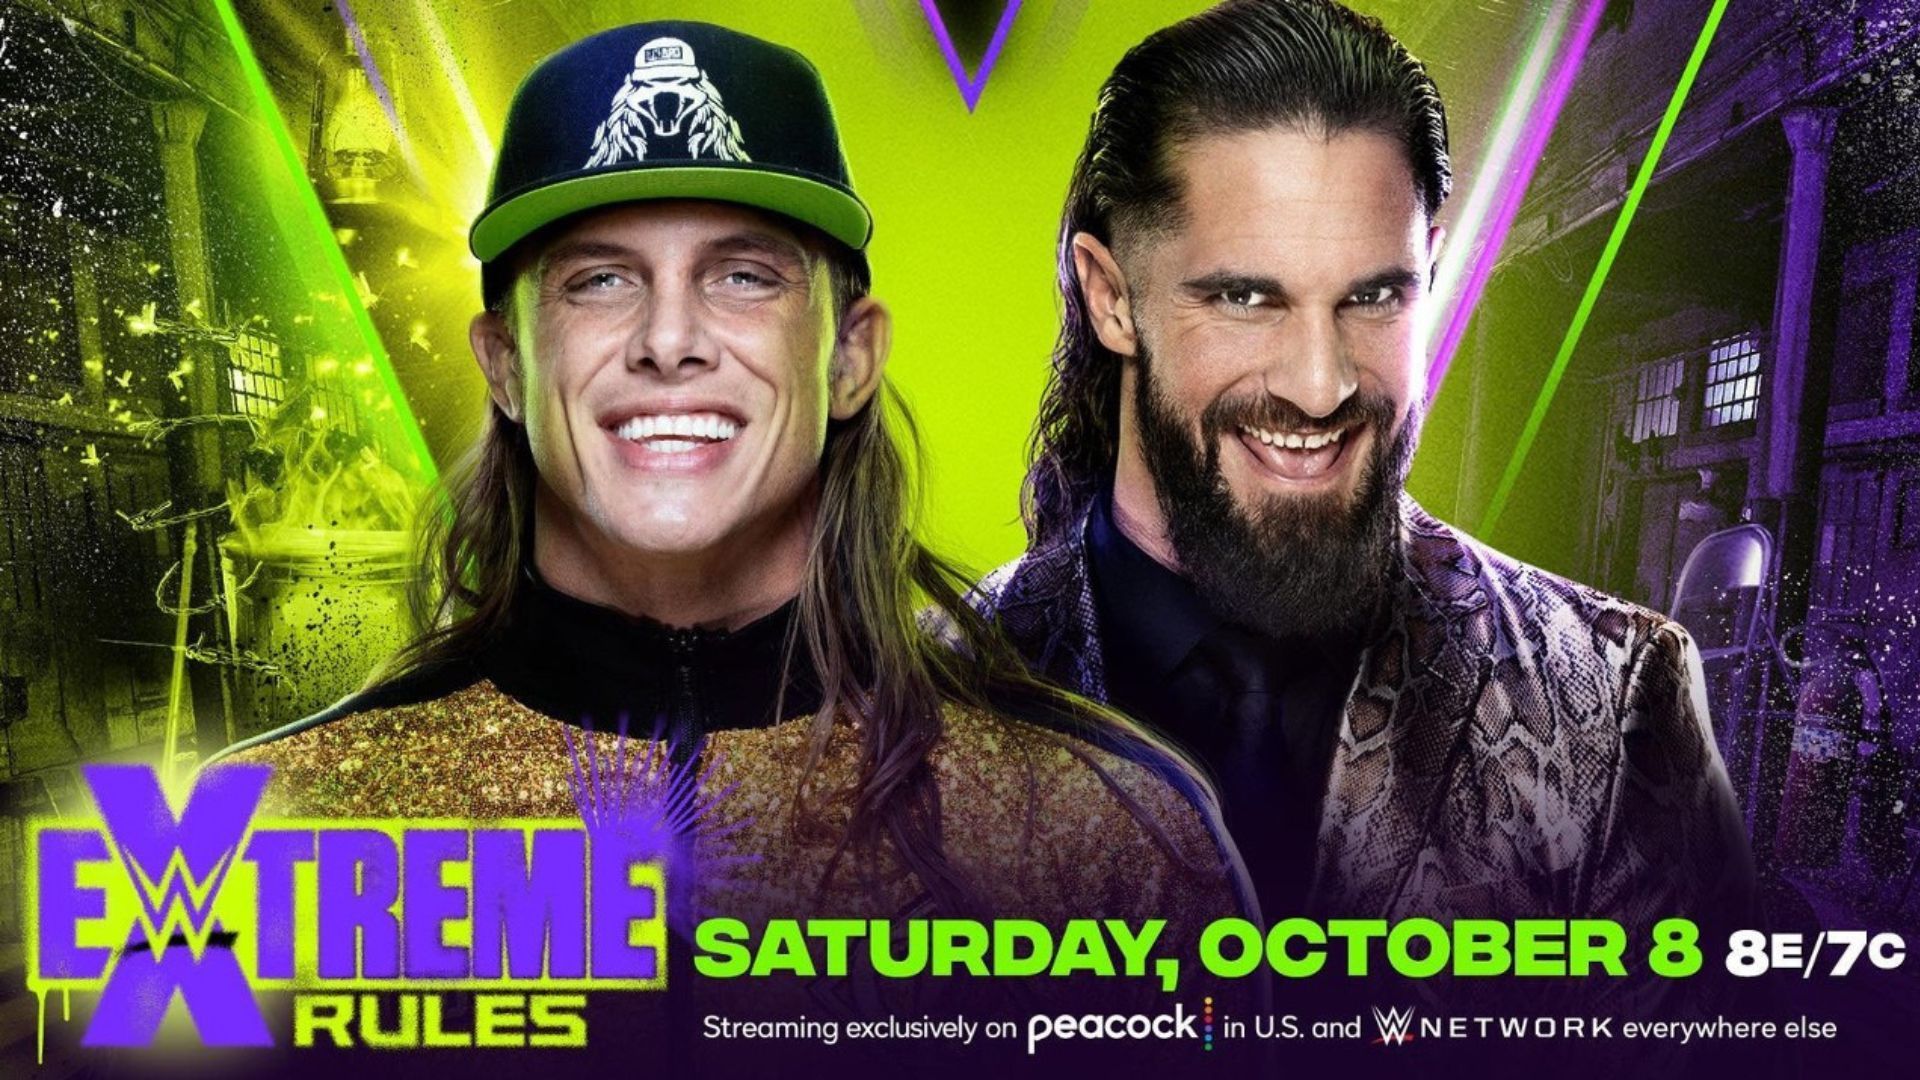 Seth Rollins will battle Matt Riddle at WWE Extreme Rules